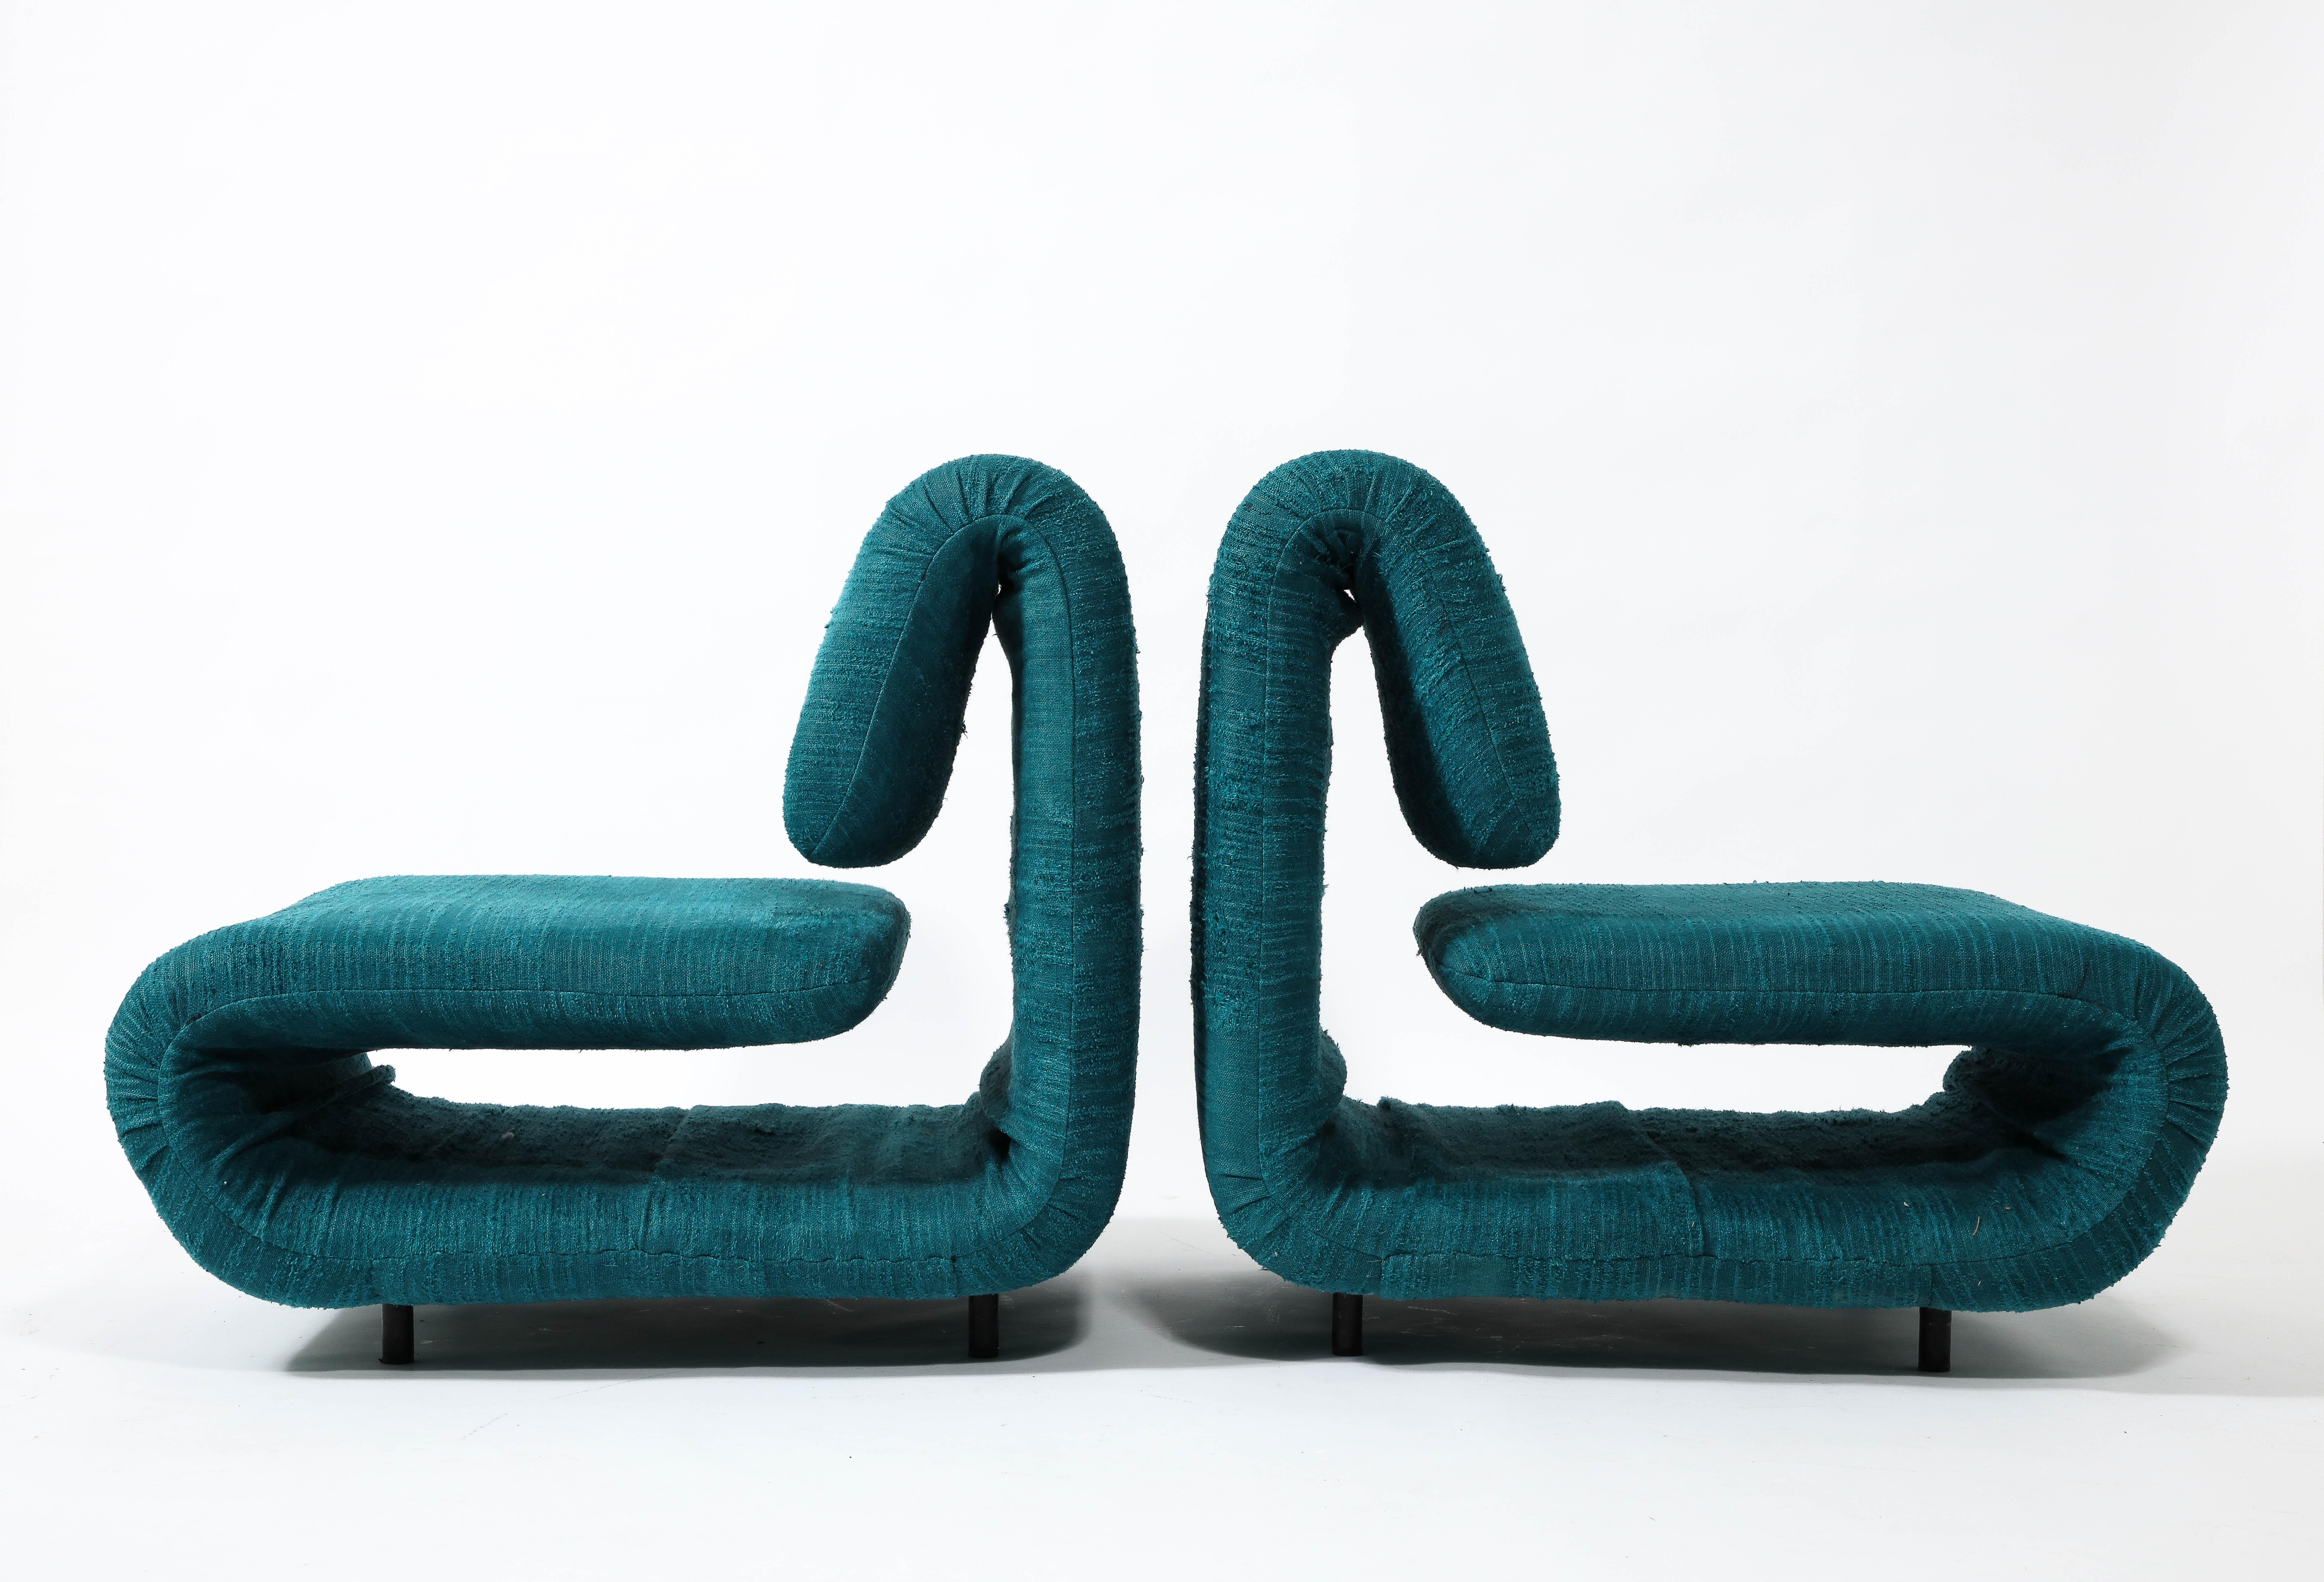 1500 lounge chairs by Etienne-Henri Martin, a second set is available offered COM.